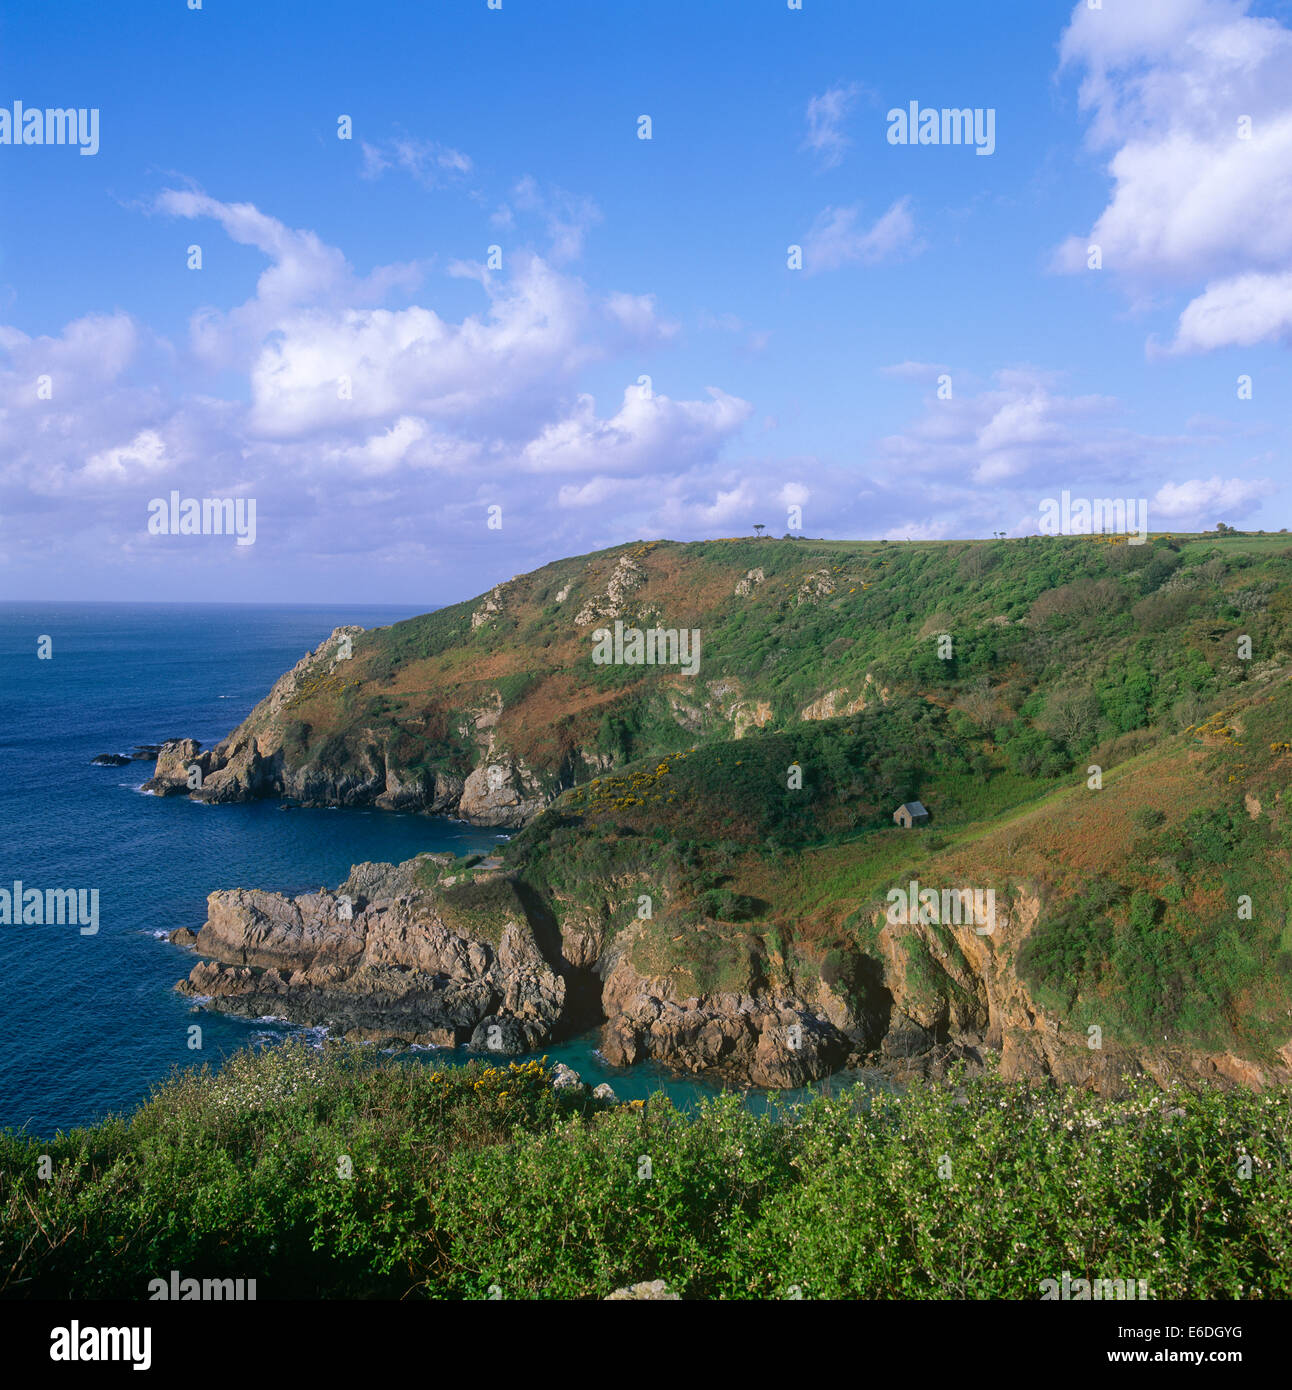 Forest petit bot a Guernsey Isole del Canale della Manica UK Foto Stock